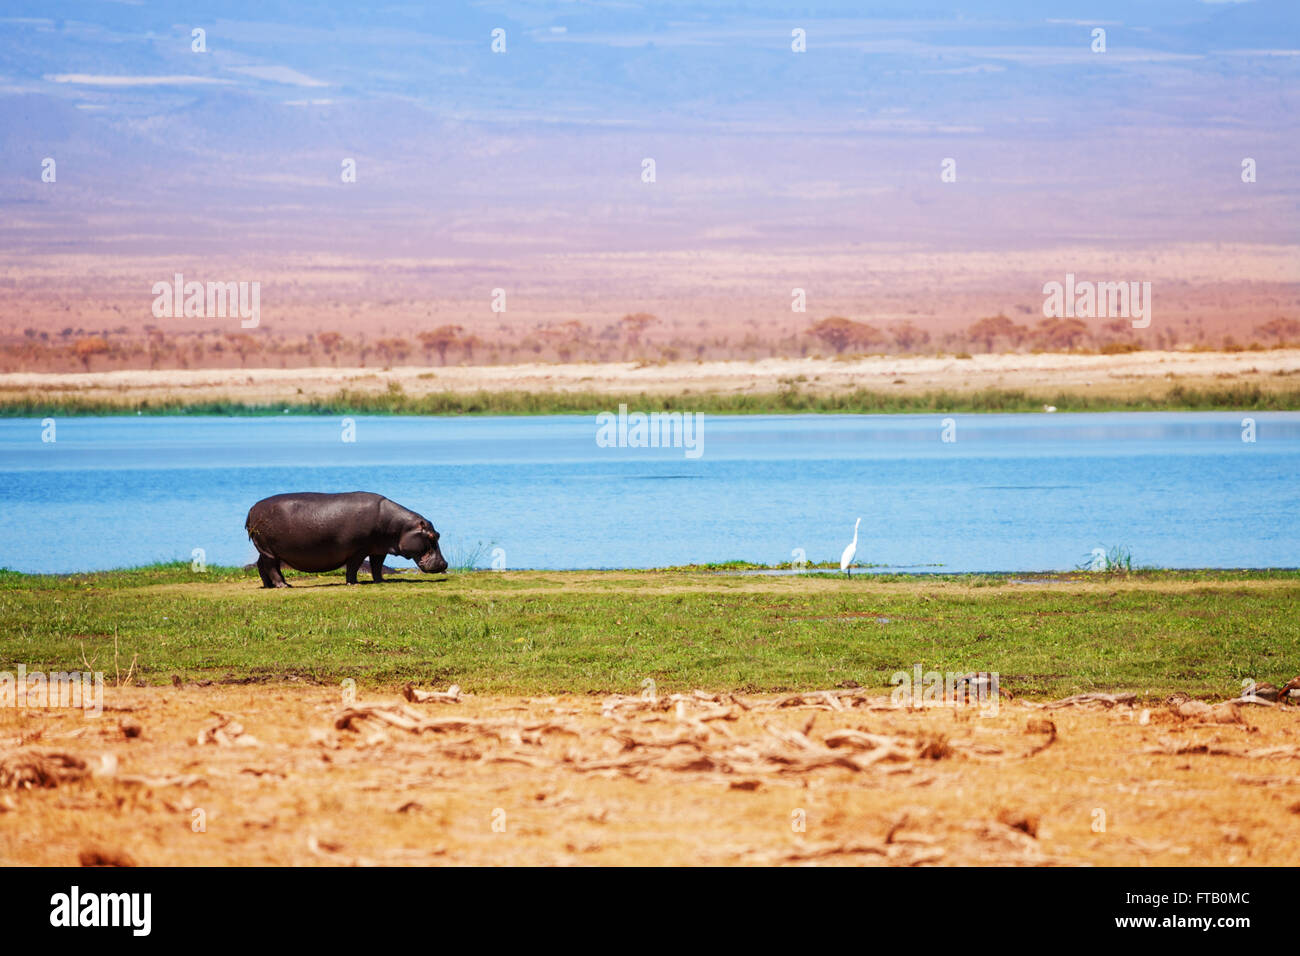 Hippo out of water walking in grass, Kenya, Africa Stock Photo